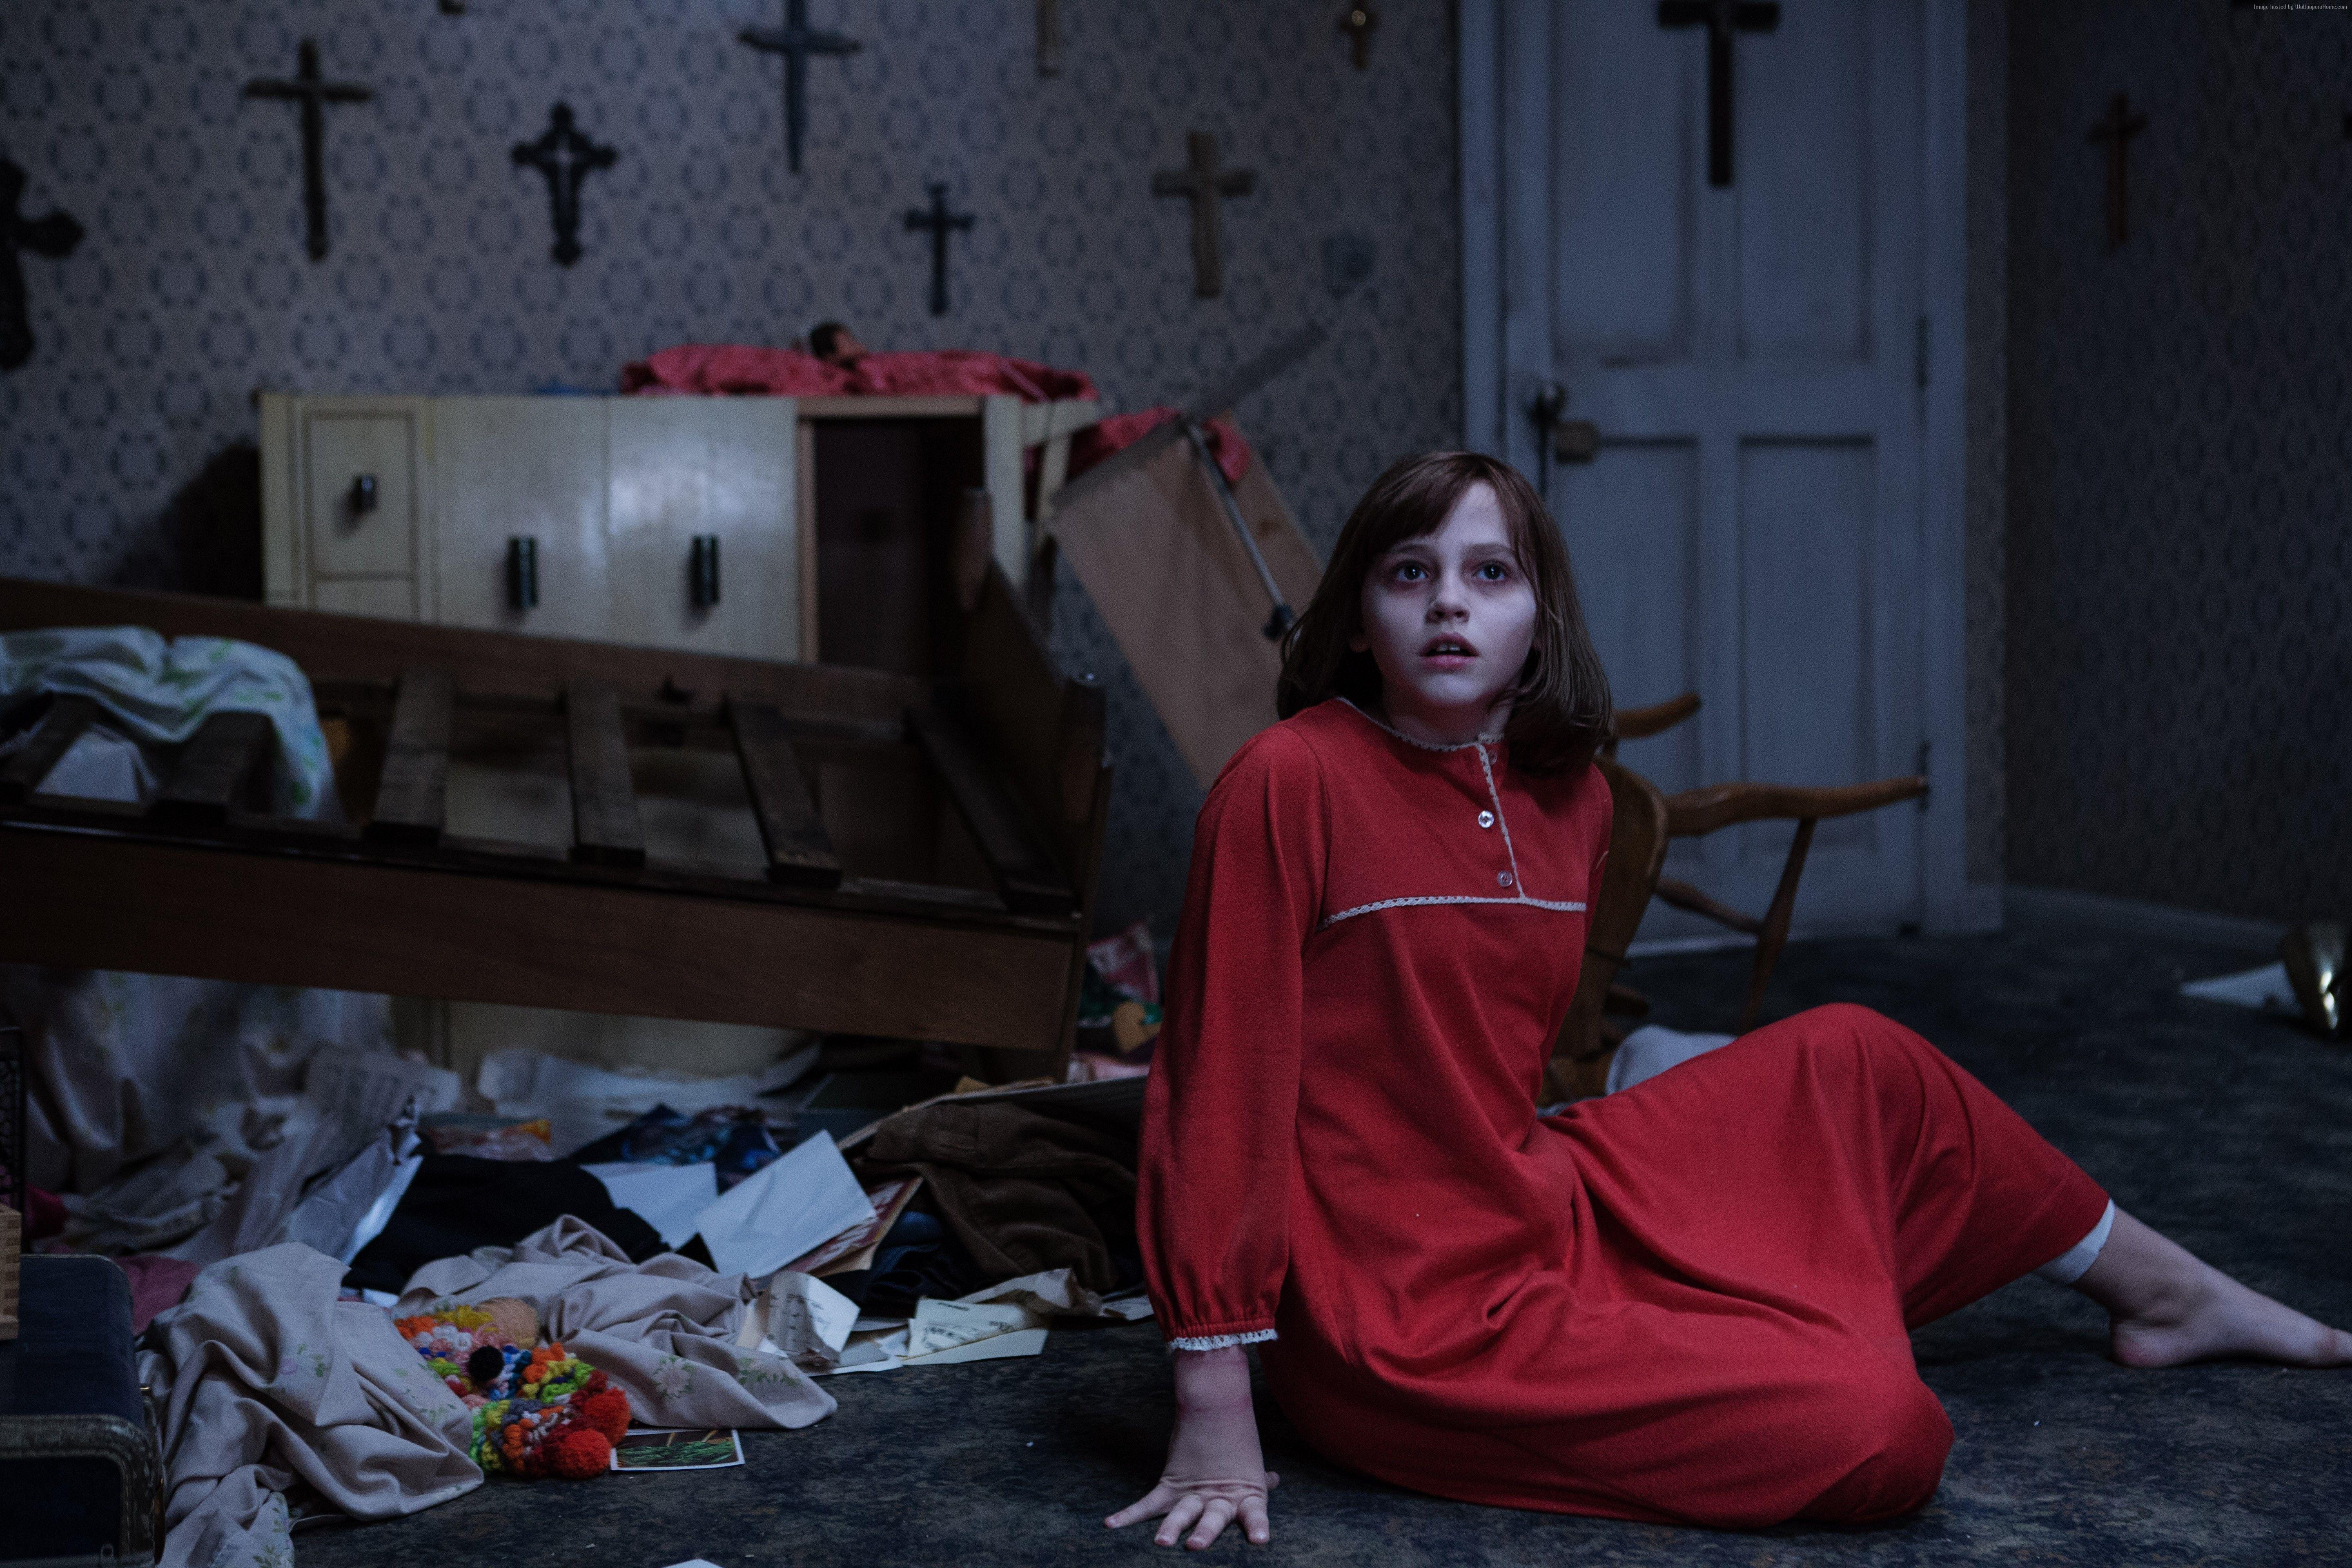 The Conjuring 2 Wallpaper, Movies: The Conjuring 2, Best Movies of